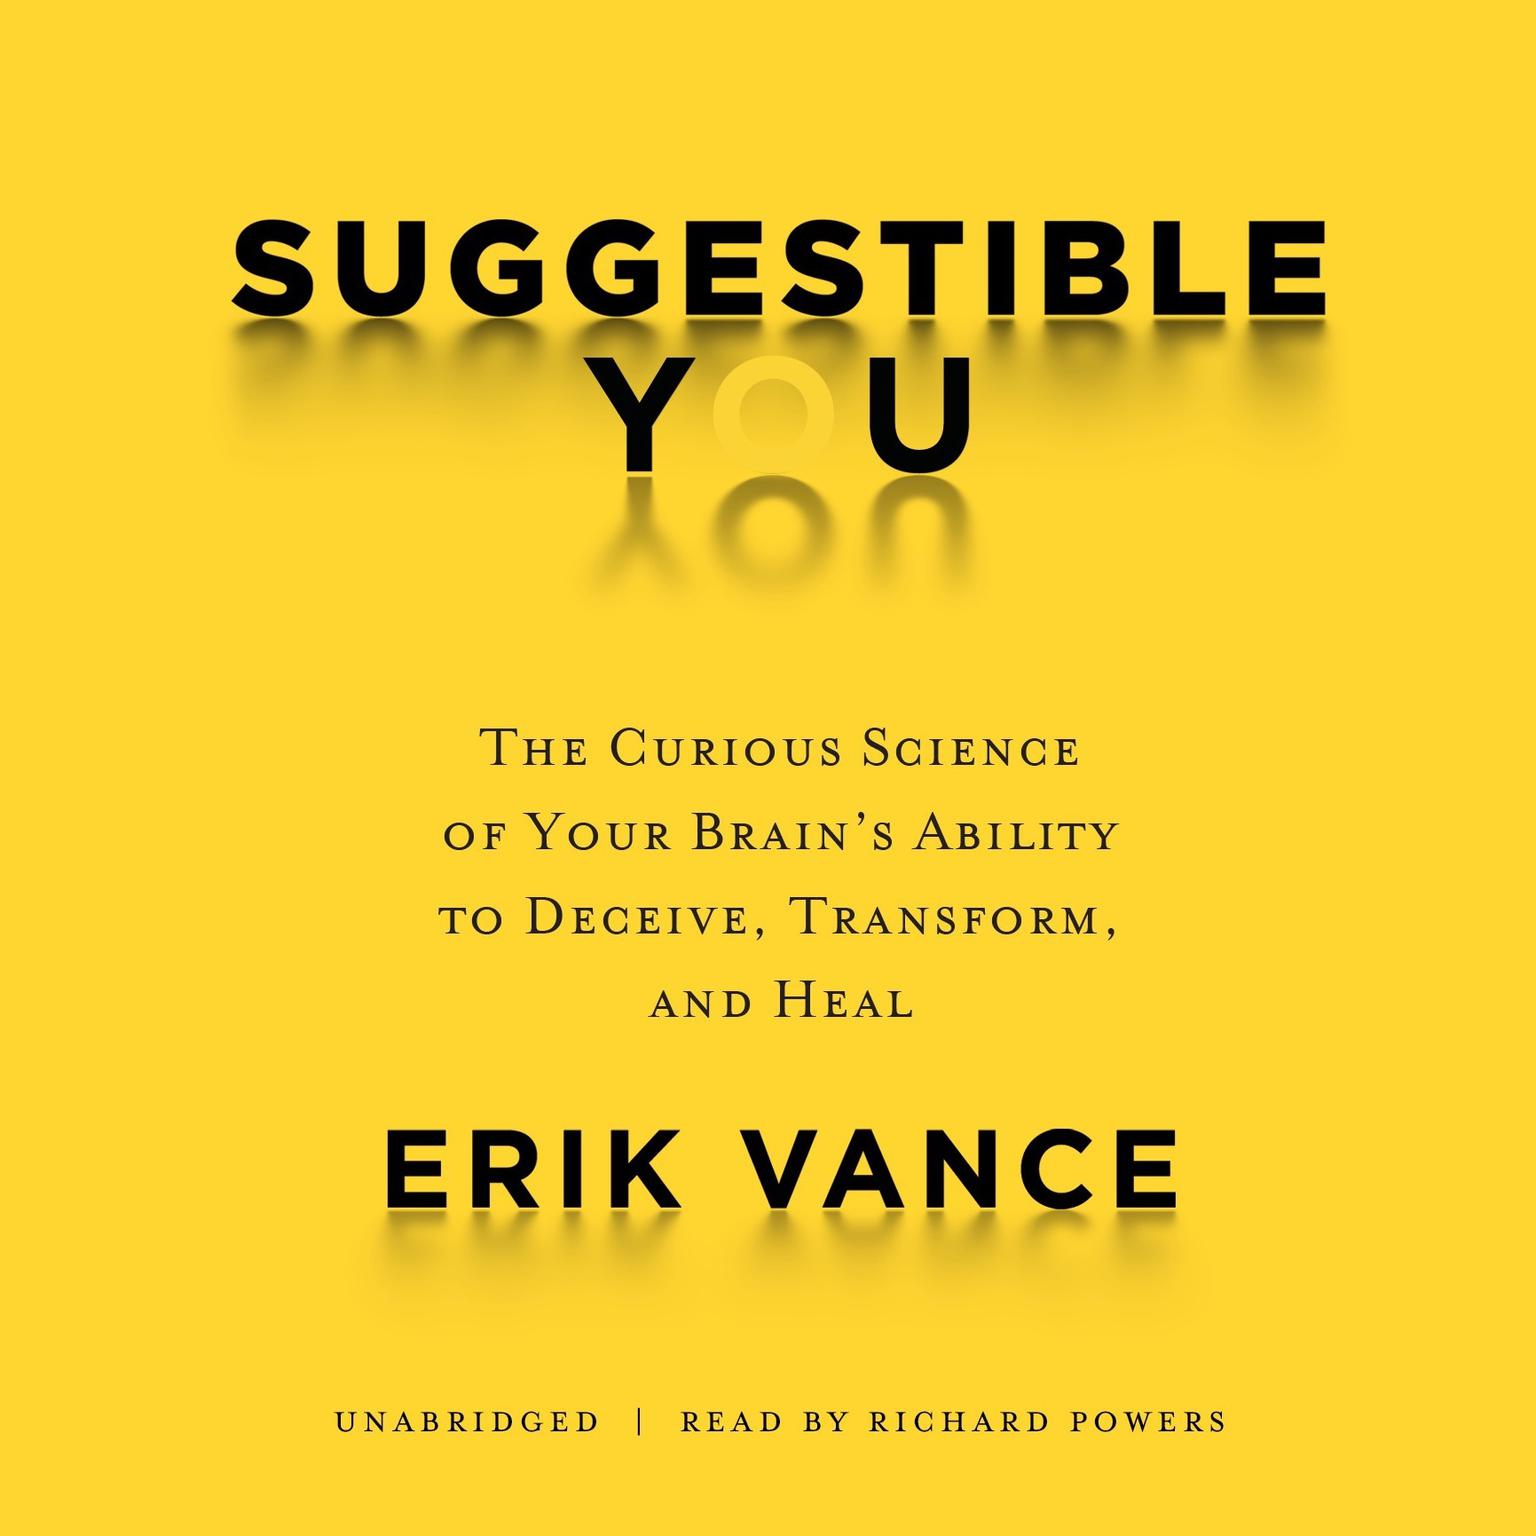 Suggestible You: The Curious Science of Your Brain’s Ability to Deceive, Transform, and Heal Audiobook, by Erik Vance